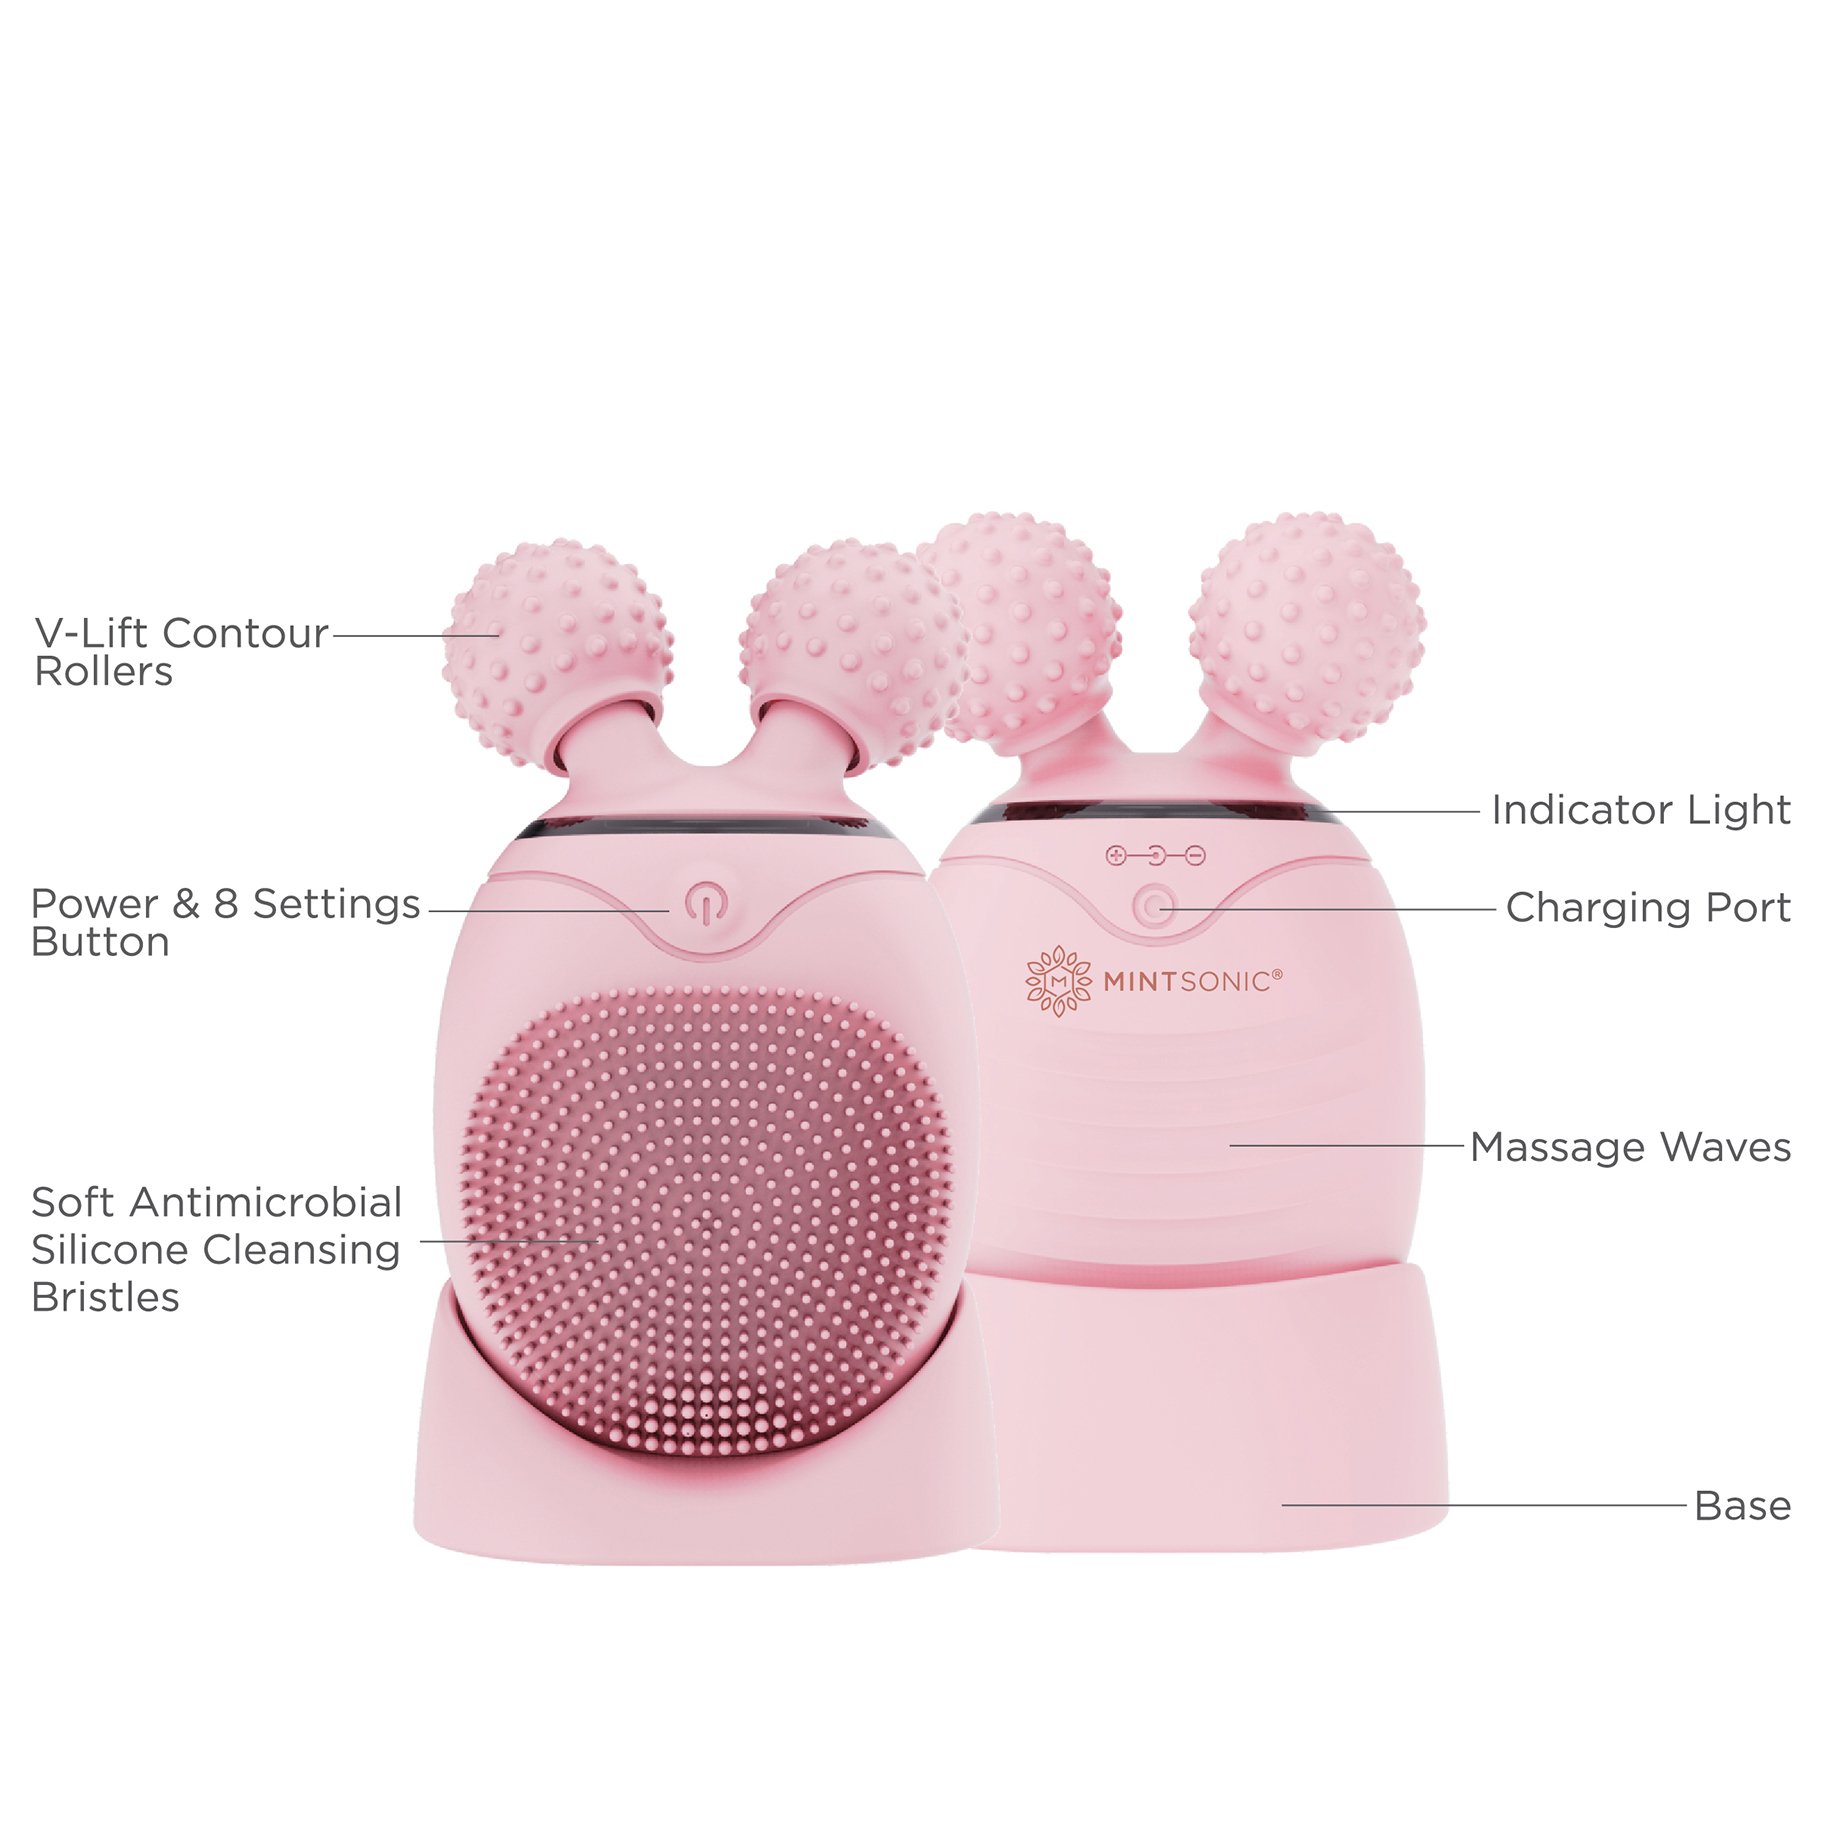 MINTSonic facial cleansing brush in Spa